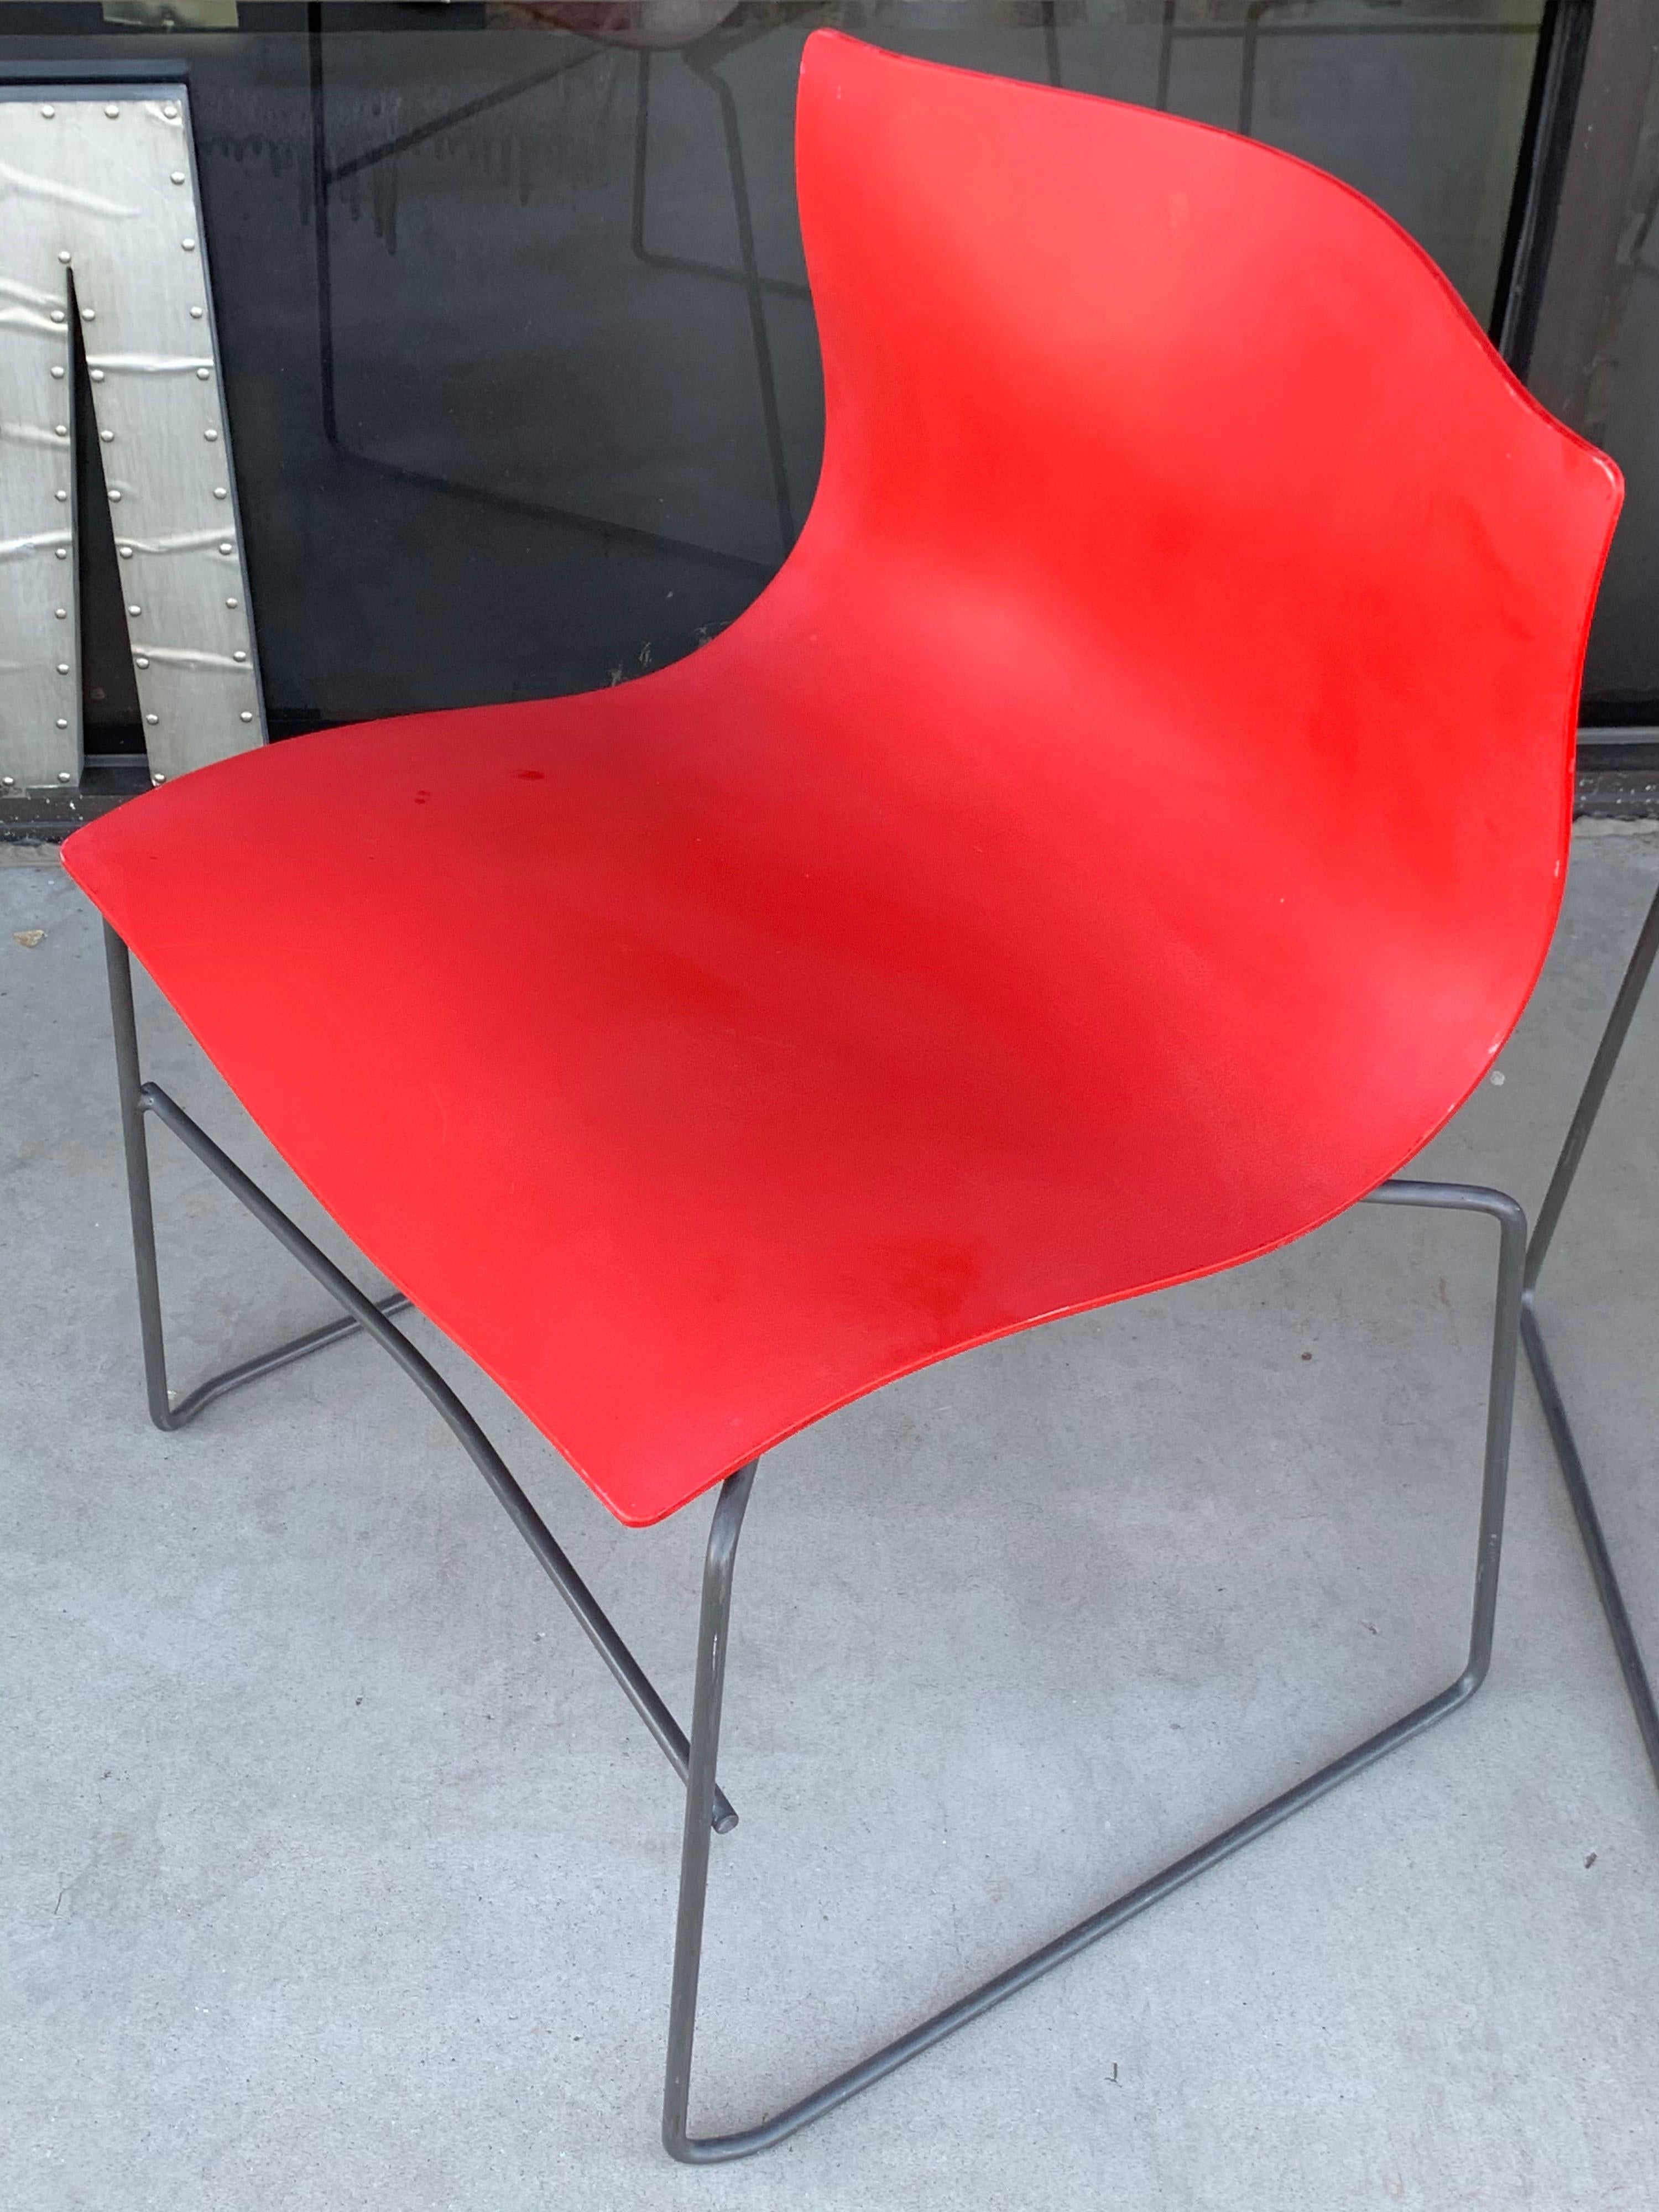 American Pair of Rare Red Handkerchief Chairs by Massimo Vignelli, 1985